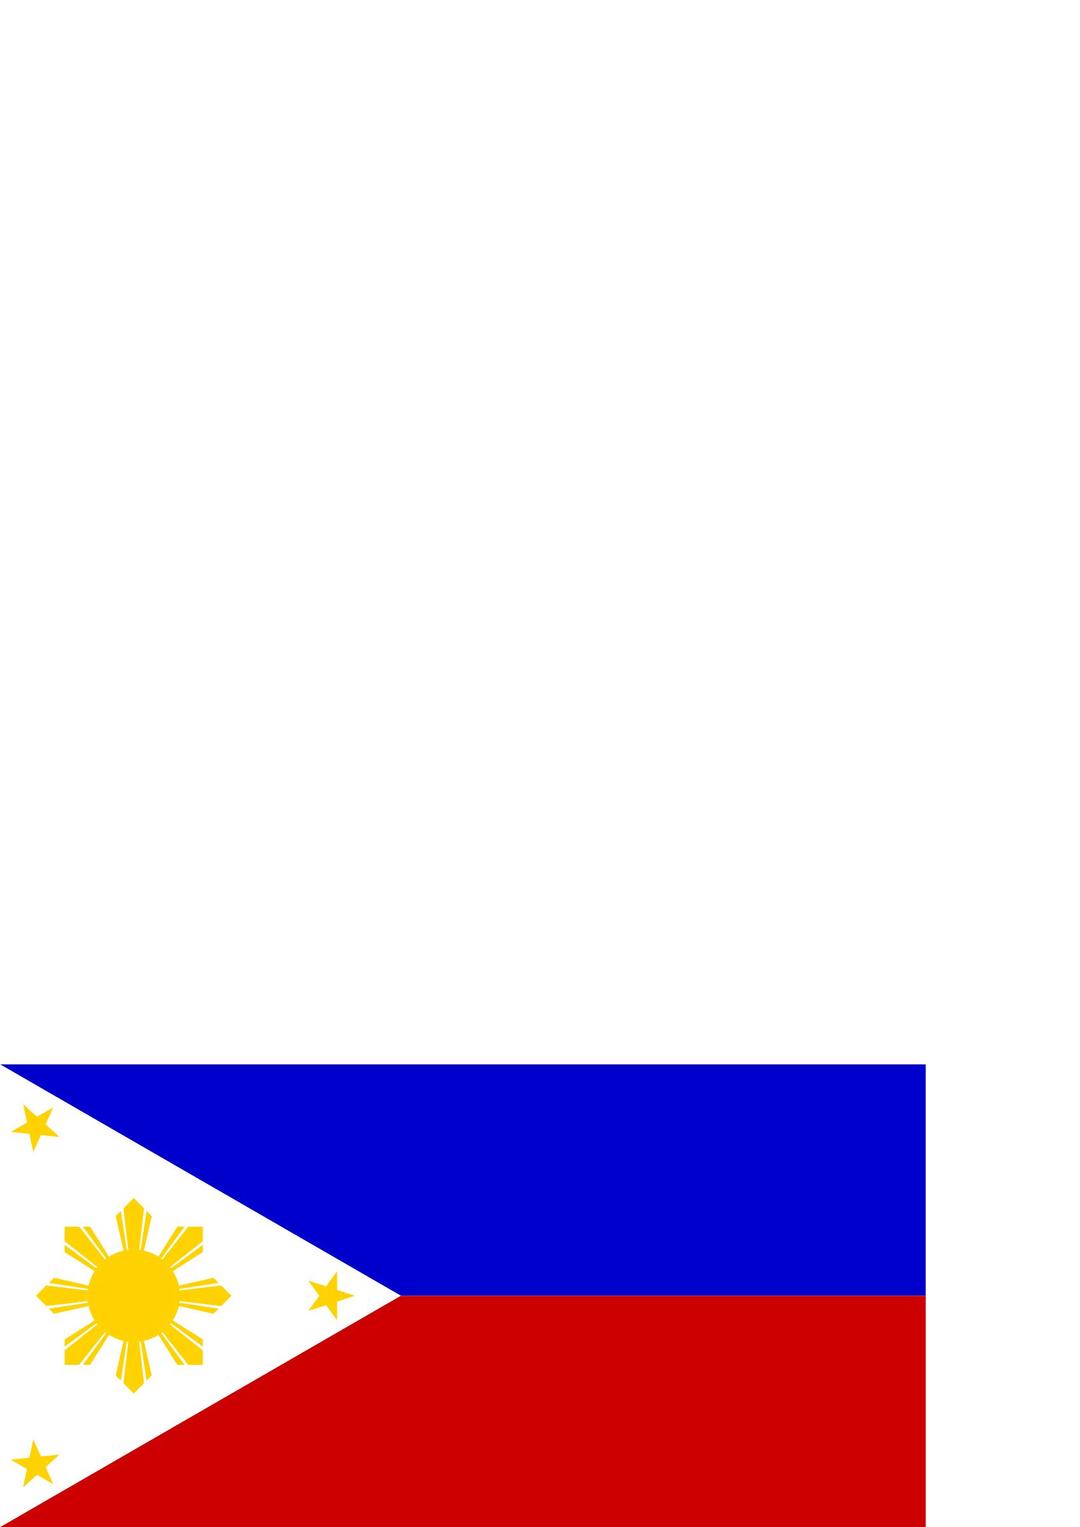 The Philippine Flag png transparent